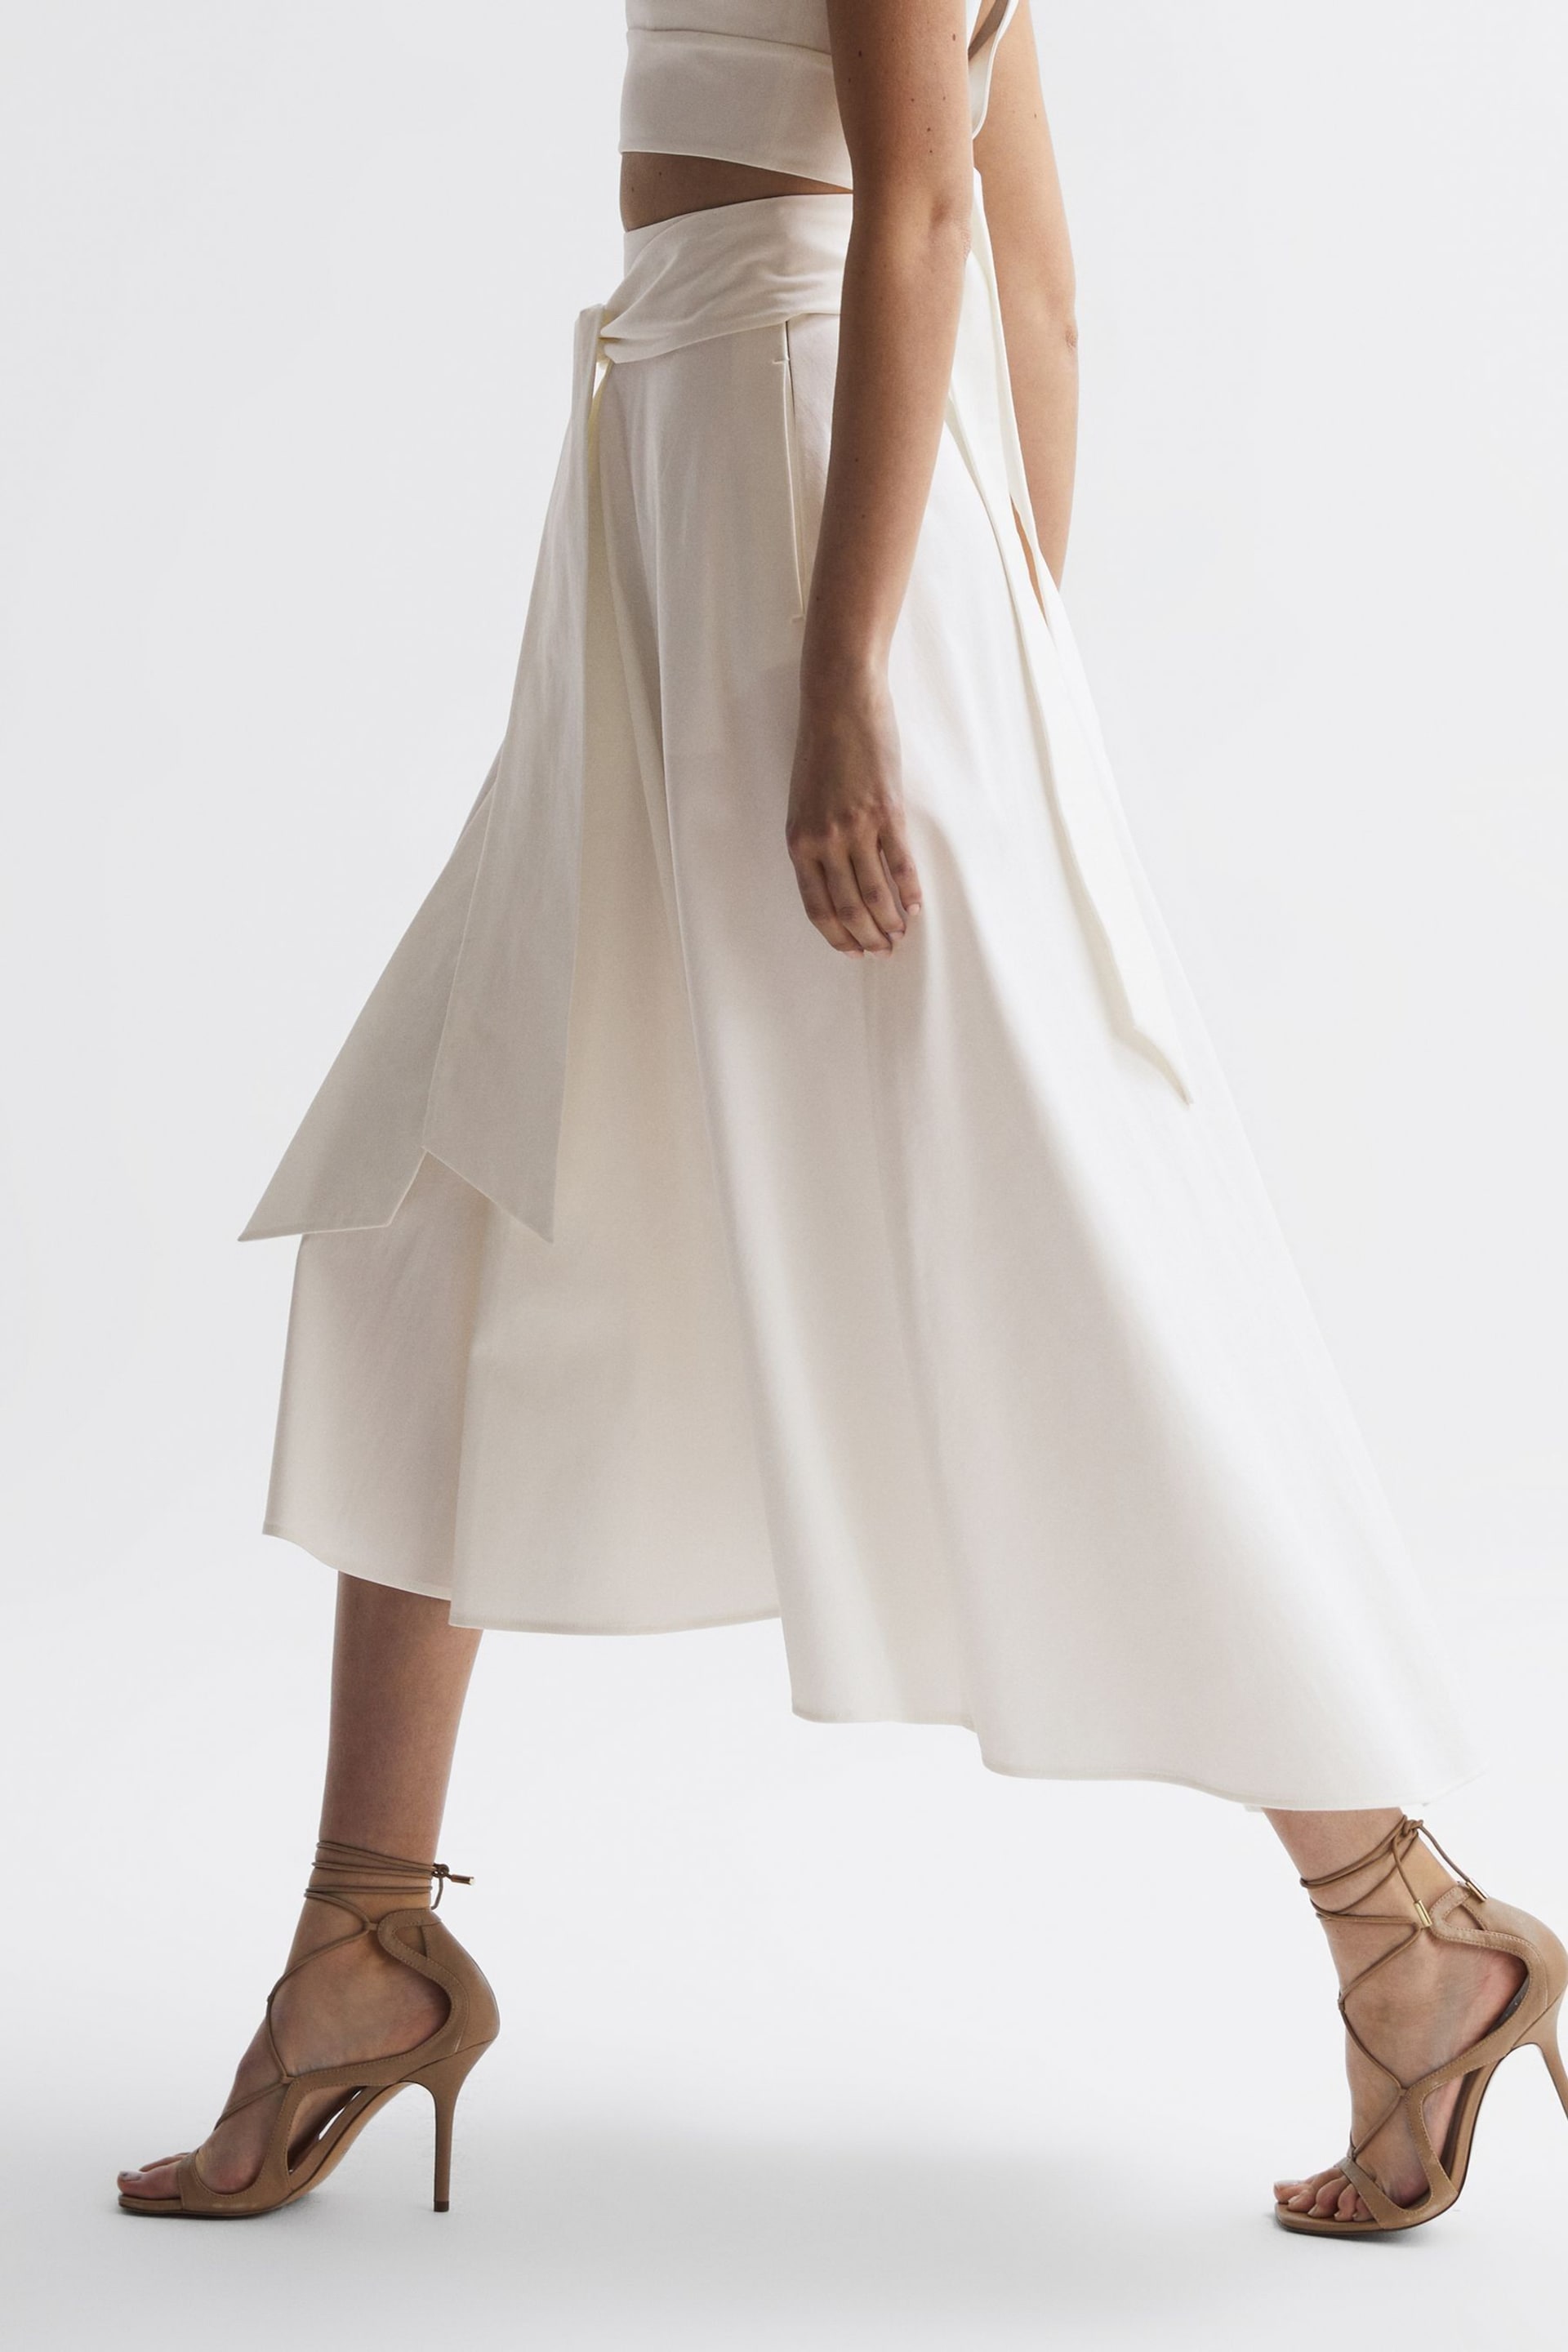 Reiss White Rebecca Fitted High Rise Midi Skirt - Image 6 of 6